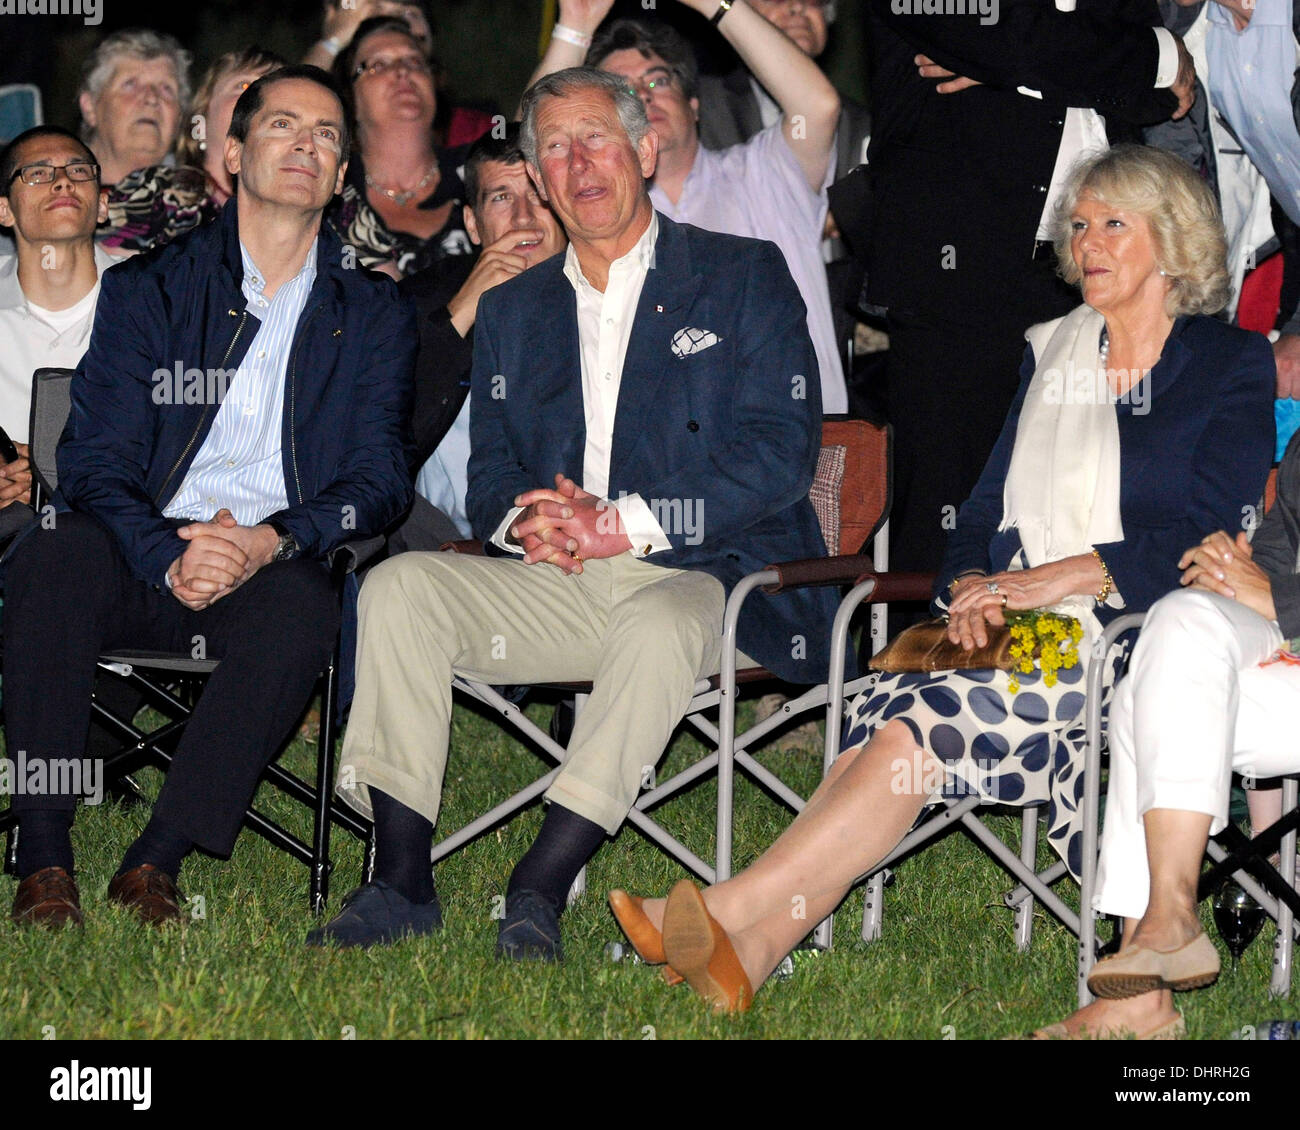 Dalton McGuinty, Premier of Ontario, Prince Charles, The Prince of Wales and Camilla, The Duchess of Cornwall   attend the Victoria Day Firework display at Ashbridges Bay hosted by the Government of Ontario during the 2012 Royal Tour of Ontario, celebrating Her Majesty's Diamond Jubilee.   Toronto, Canada - 21.05.12 Stock Photo